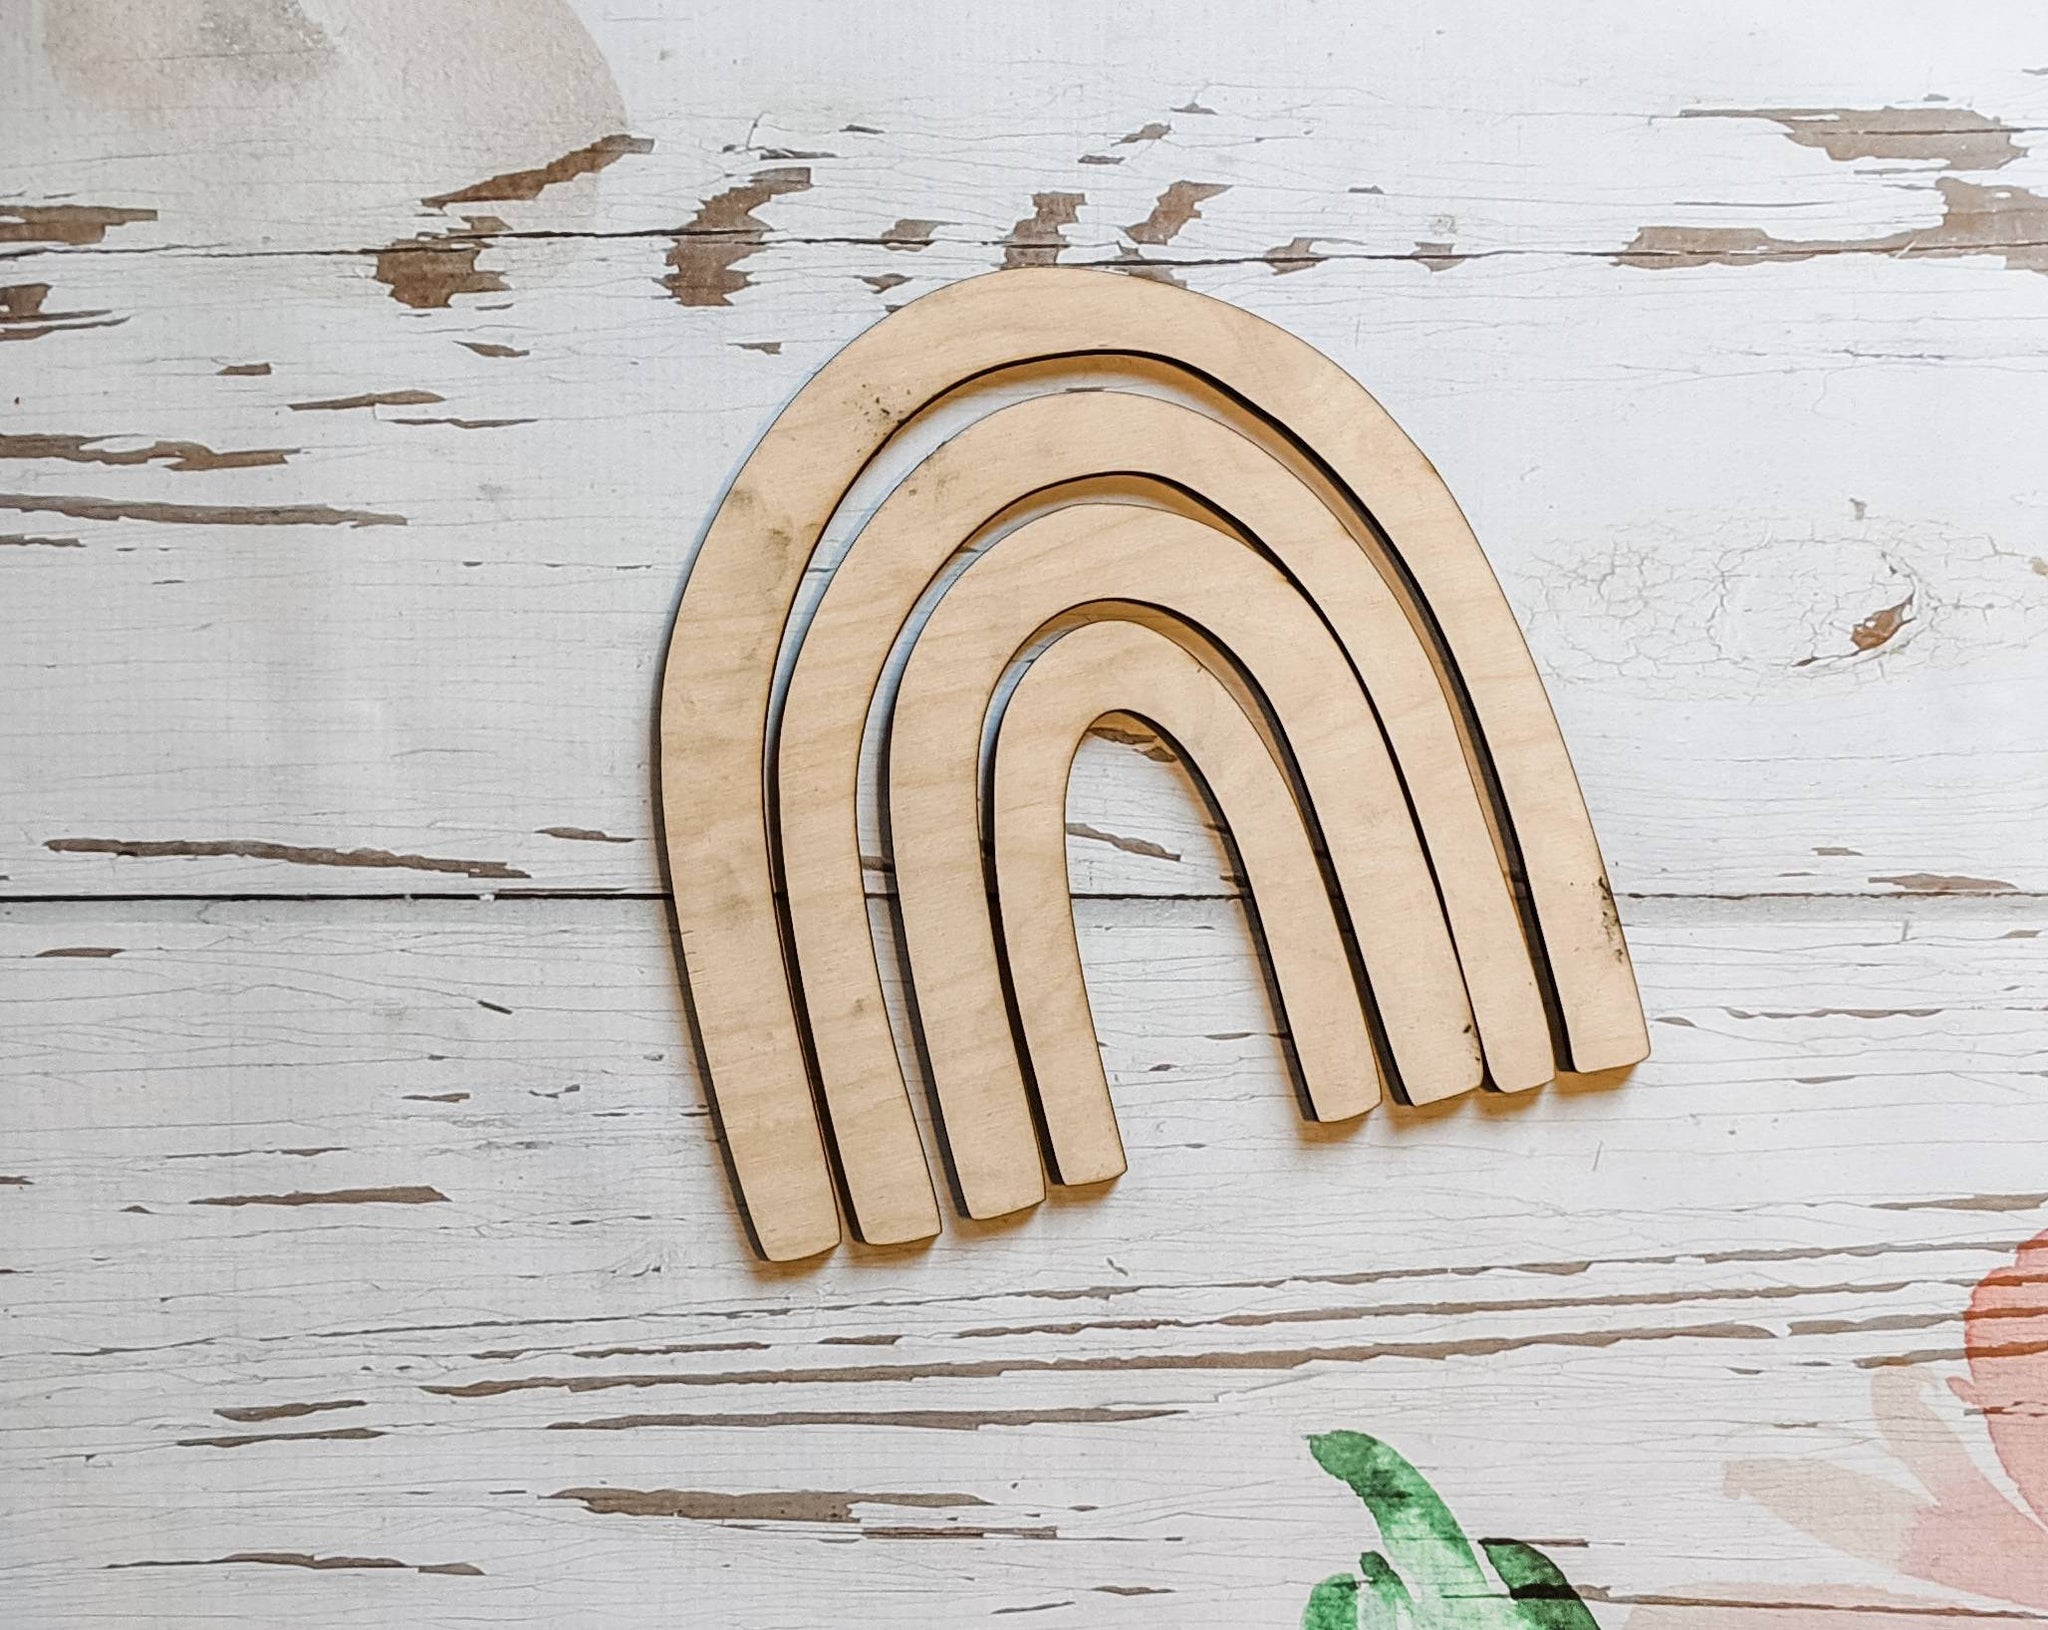 RAINBOW SHAPE - Unfinished 1/4" Wood - 7 inches - Wooden Blanks- Wooden Shapes - laser cut shape -  Kids Crafts